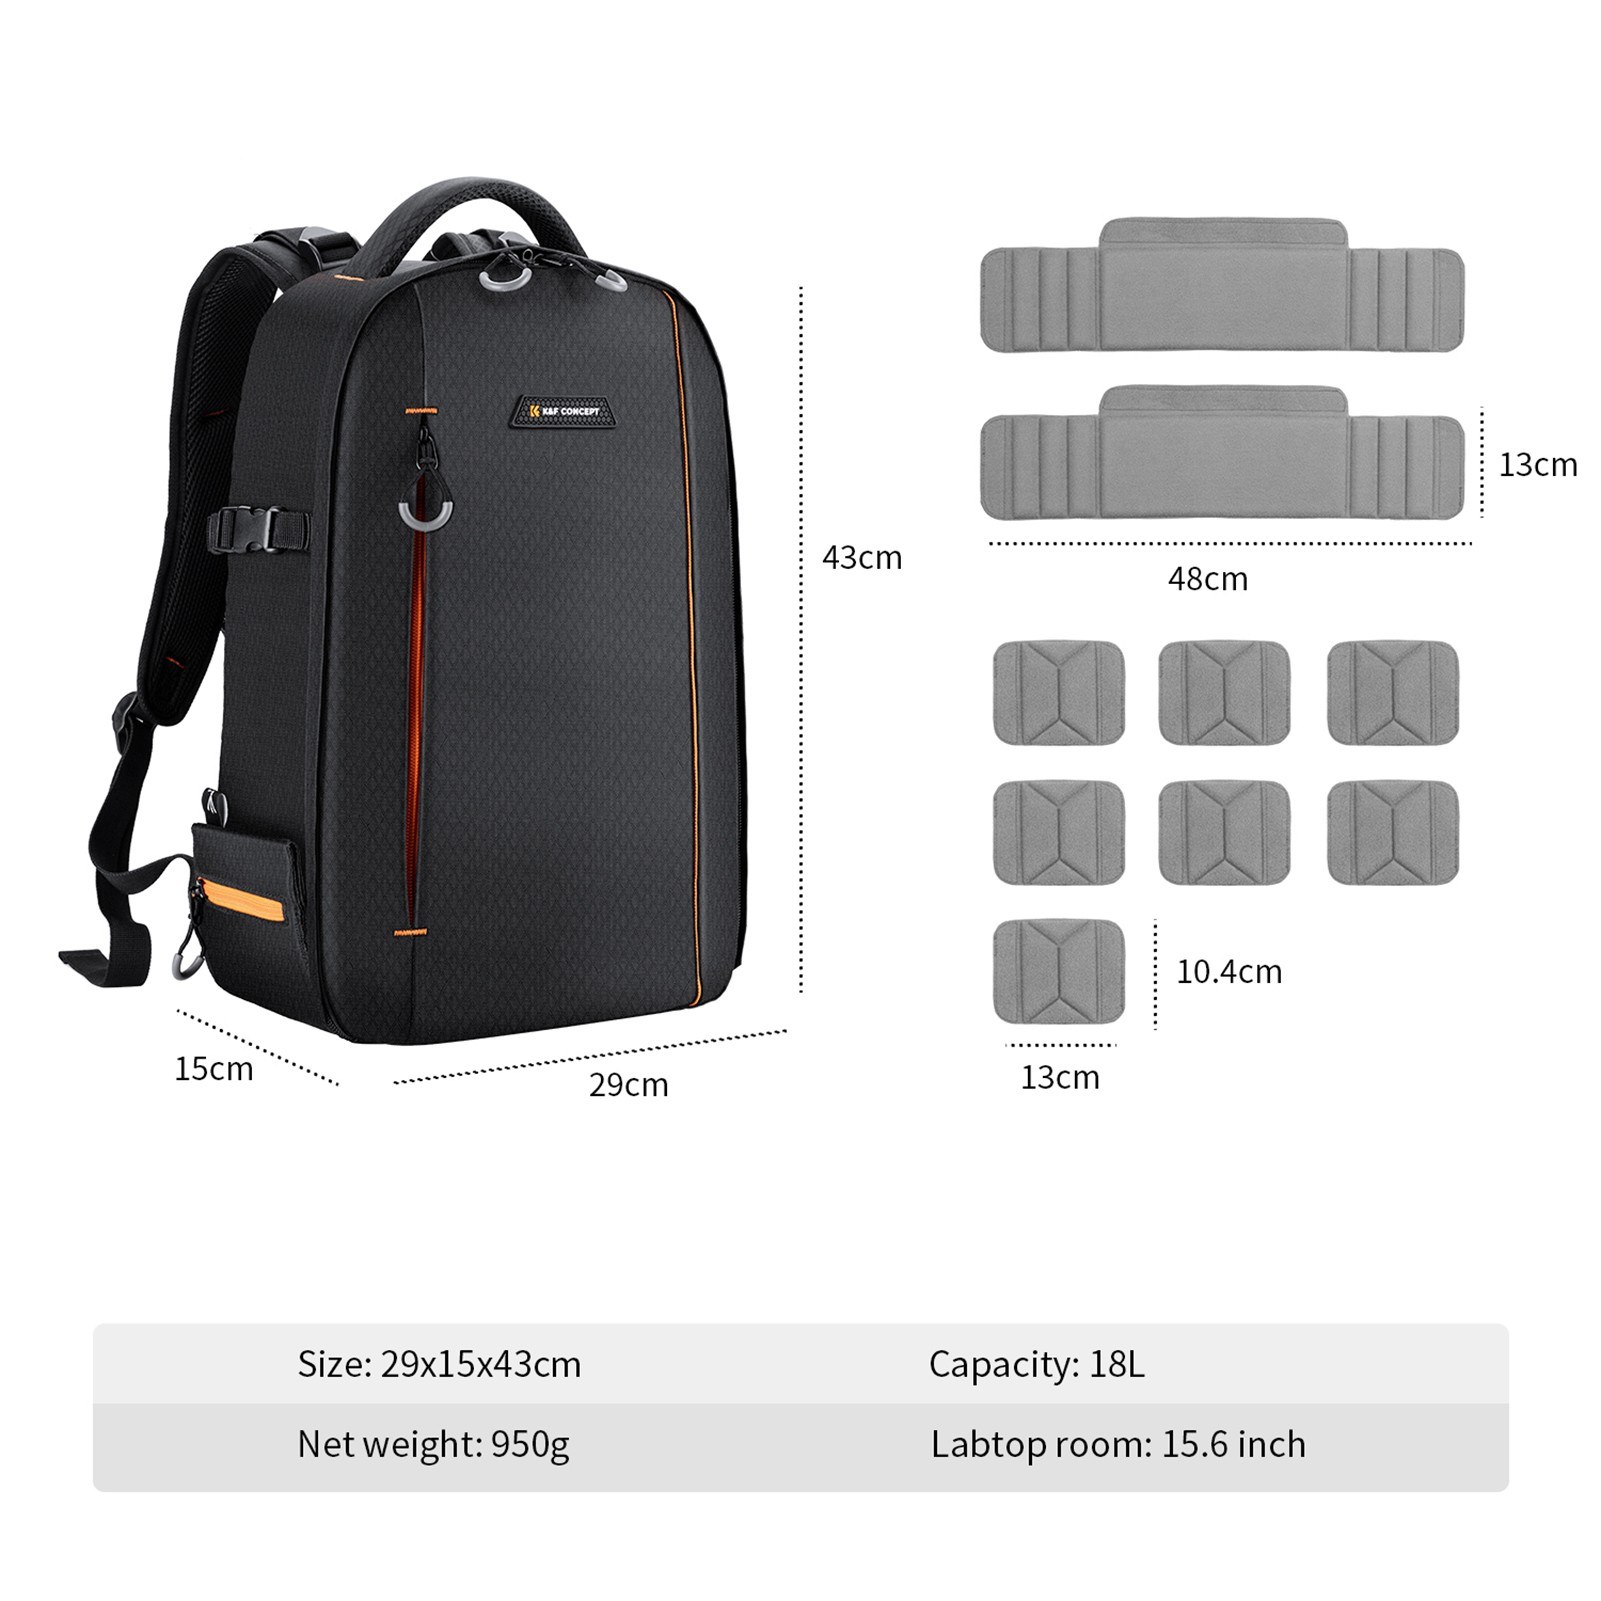 K&F Concept Multi-functional Waterproof Large Camera Backpack with Tripod Holder